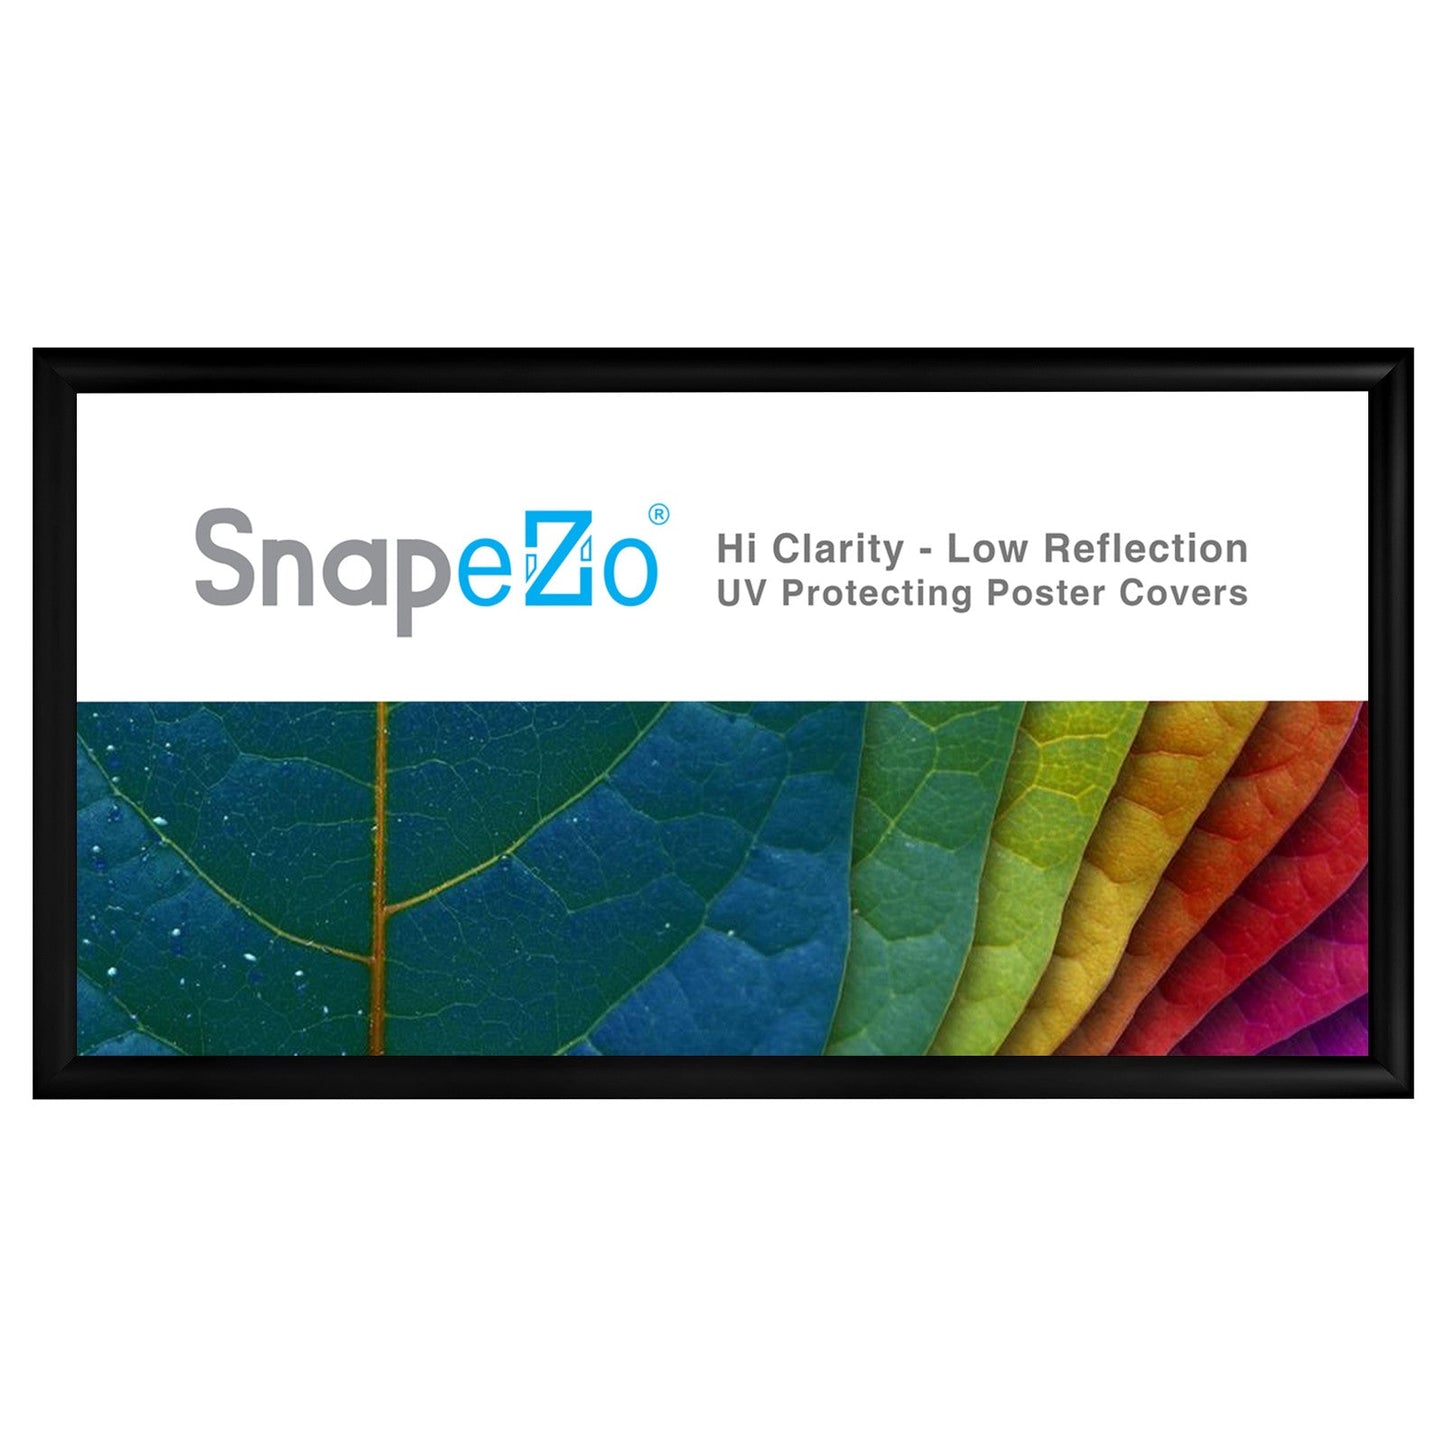 Load image into Gallery viewer, 11x22 Black SnapeZo® Snap Frame - 1.2&amp;quot; Profile
